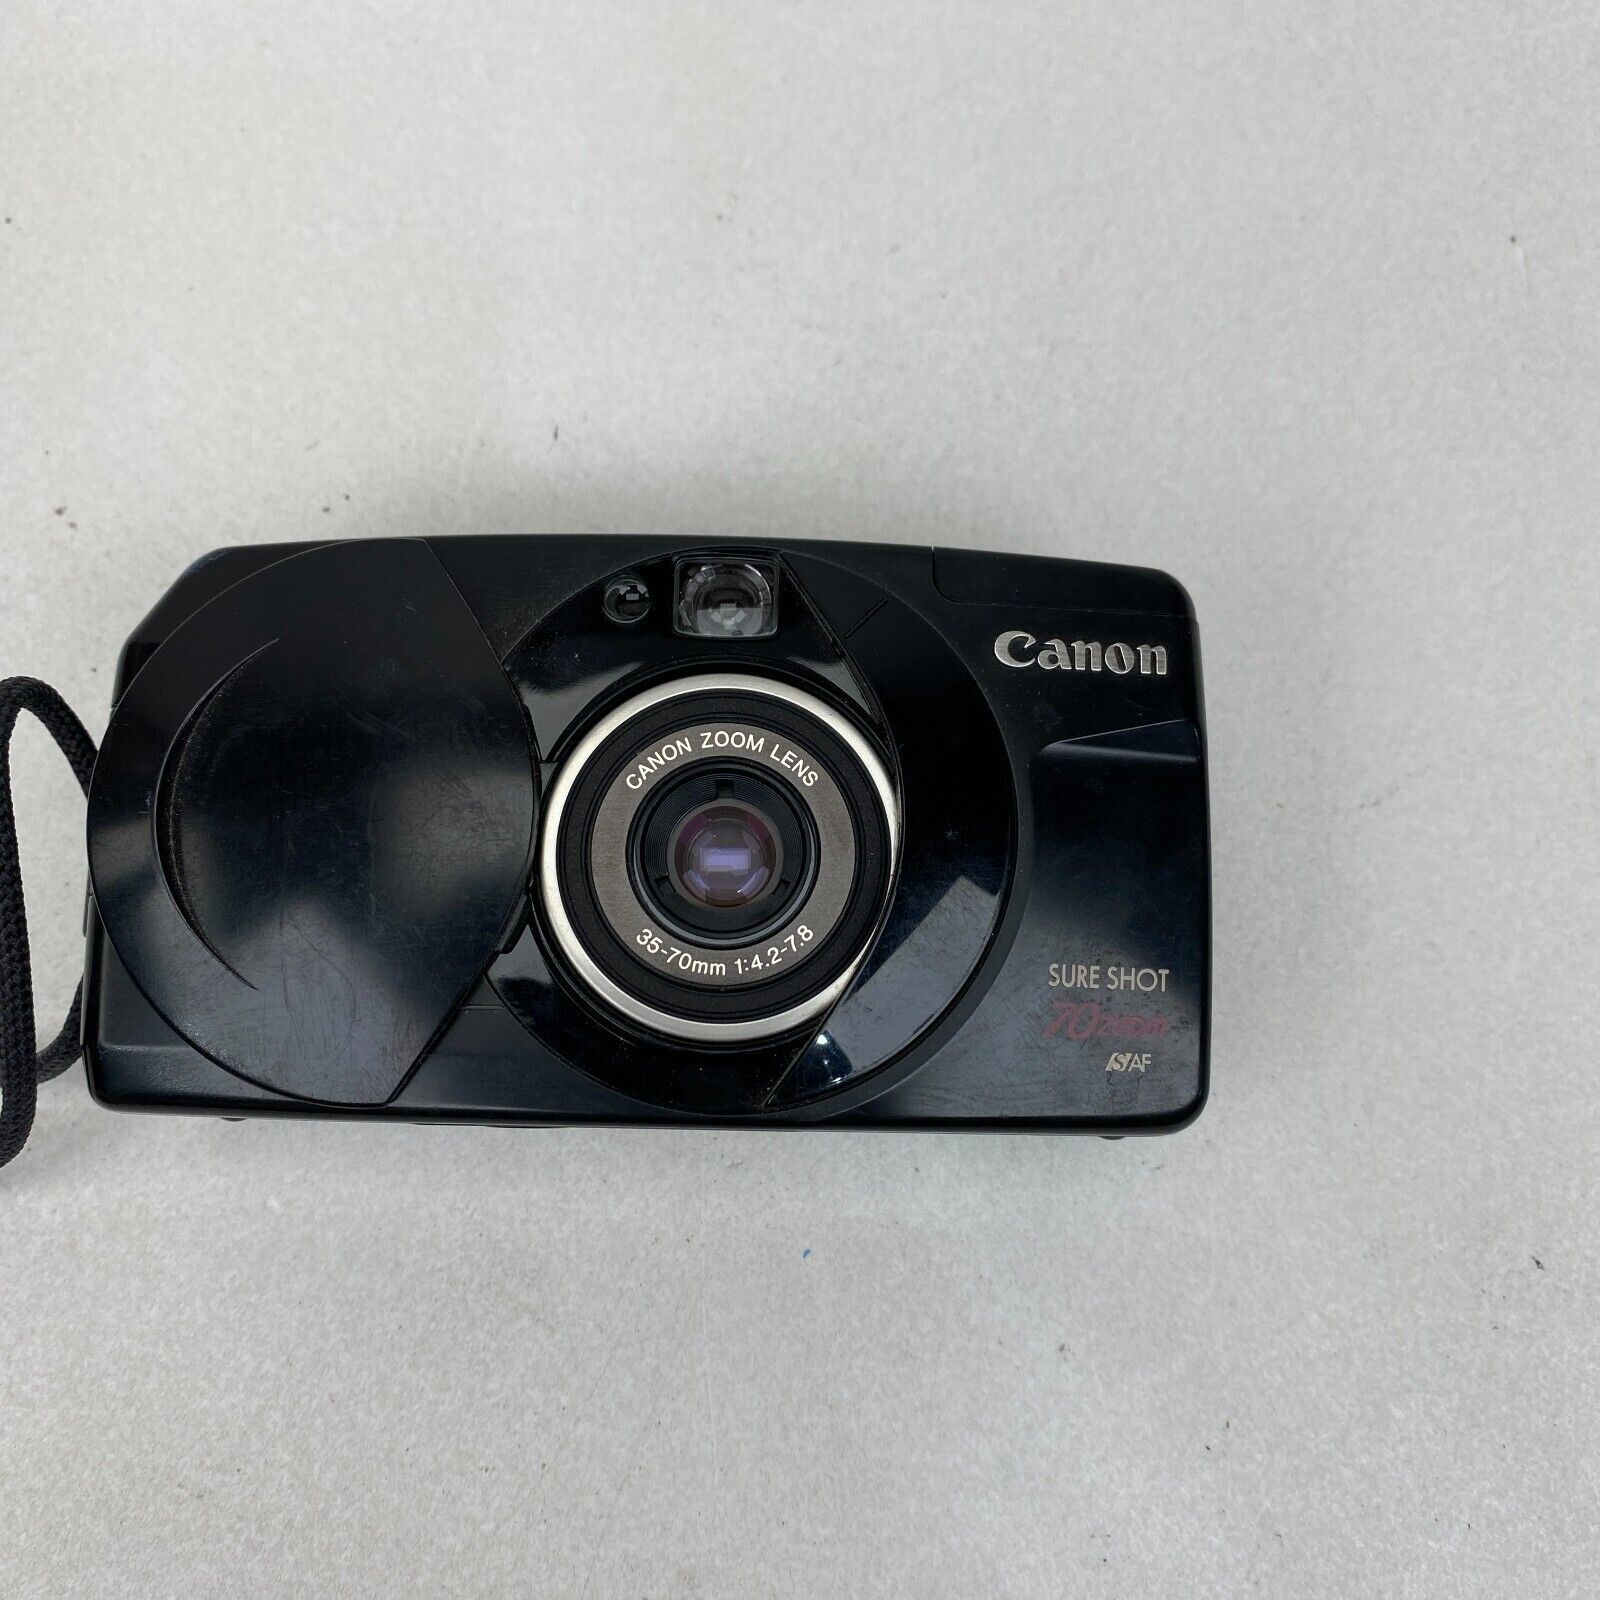 Primary image for Parts or Repair Canon Sure Shot 70 Zoom Date SAF 35mm Point and Shoot Camera